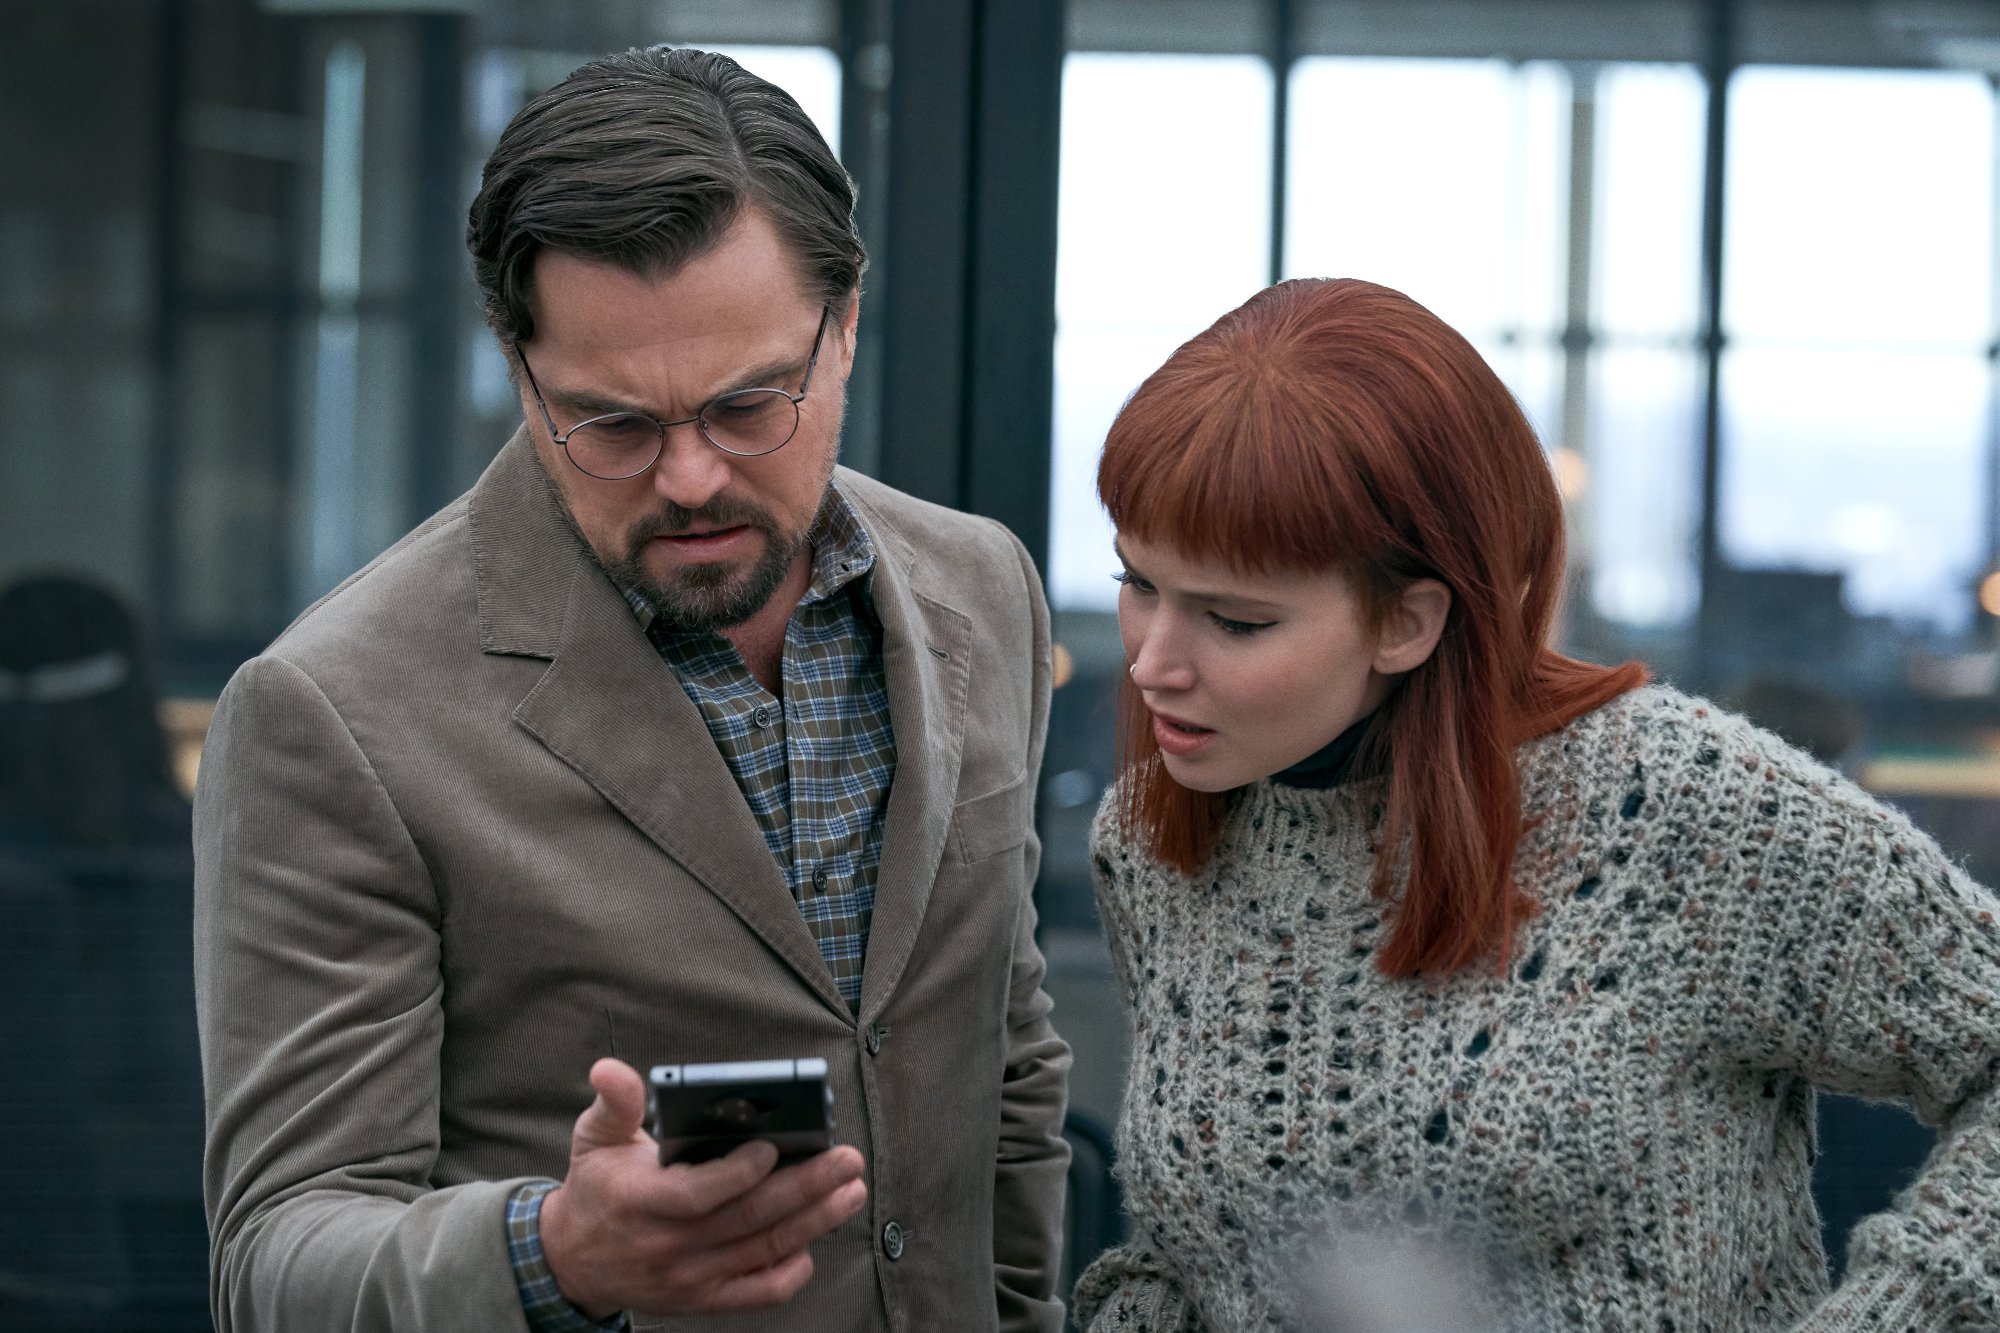 Leonardo DiCaprio as Dr. Randall Mindy and Jennifer Lawrence as Kate Dibiasky in Don't Look Up looking at a cellphone